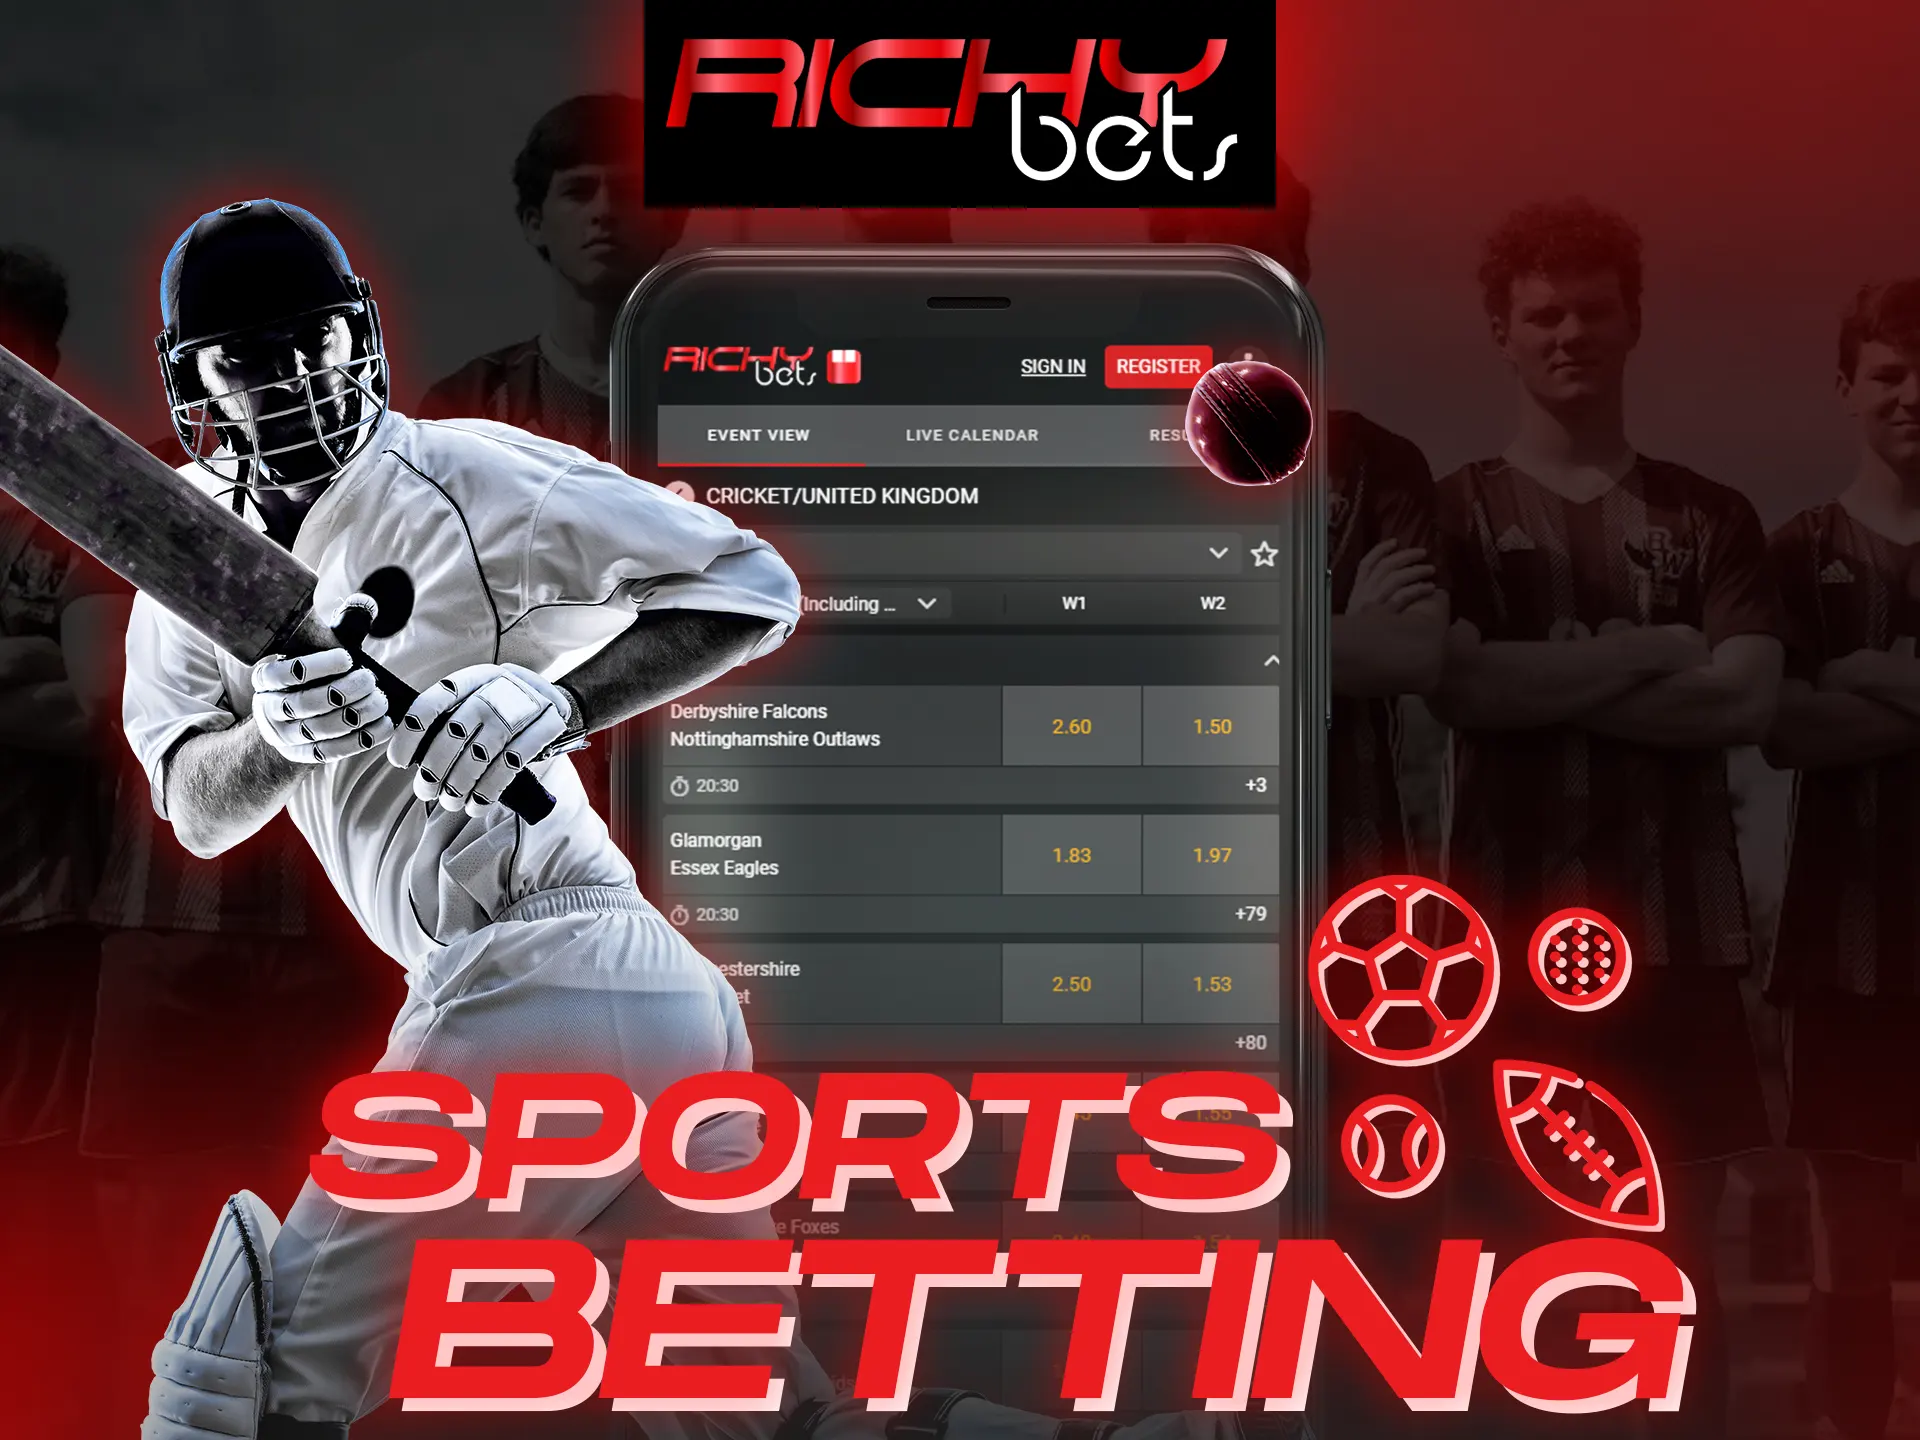 Bet on different sports on the Richybets sports page.